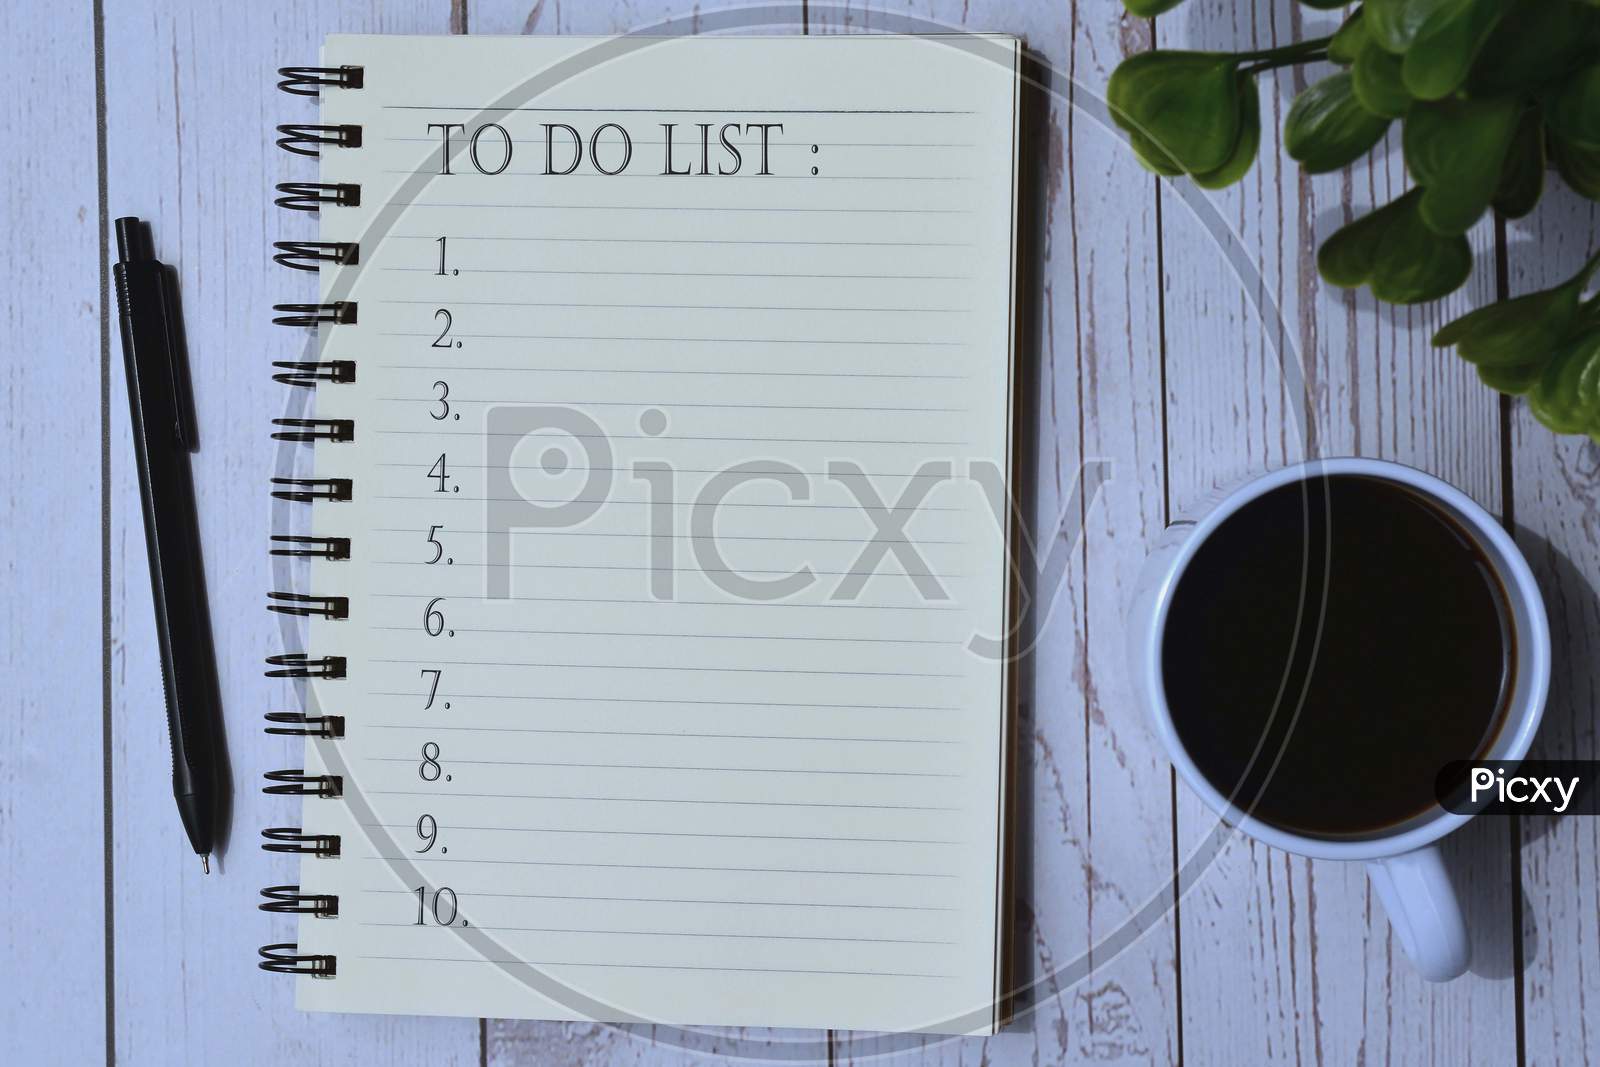 To do list on notepad with cup of coffee, pen and green leaf background on wooden desk. To do list